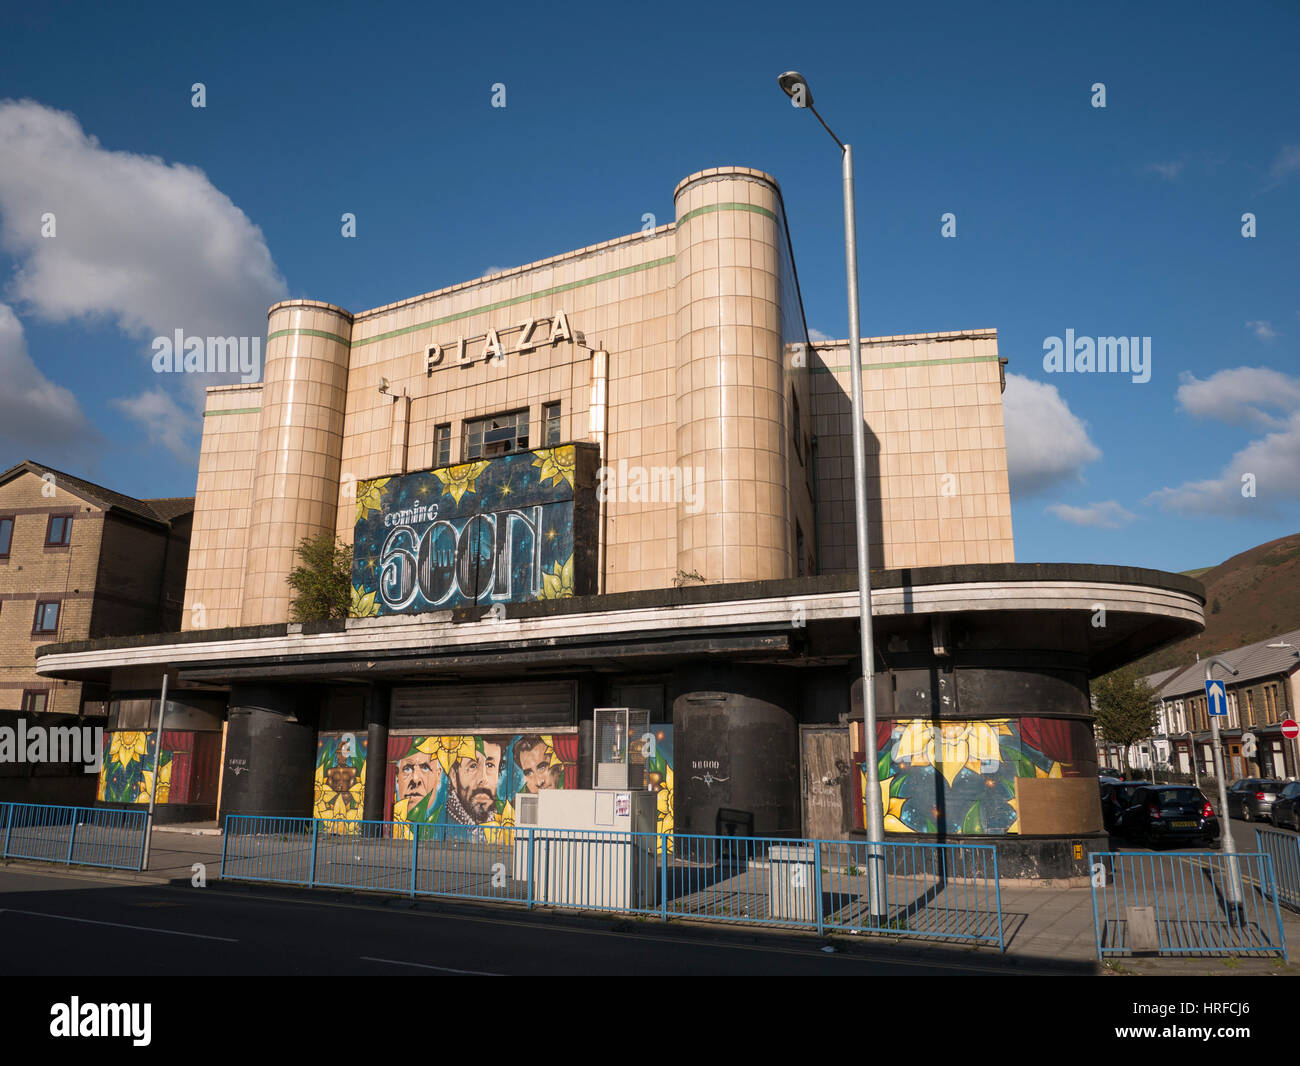 Port Talbot Plaza cinema building, derelict since 1999.  Has a large 'coming Soon' sign West Glamorgan, Wales UK. Stock Photo